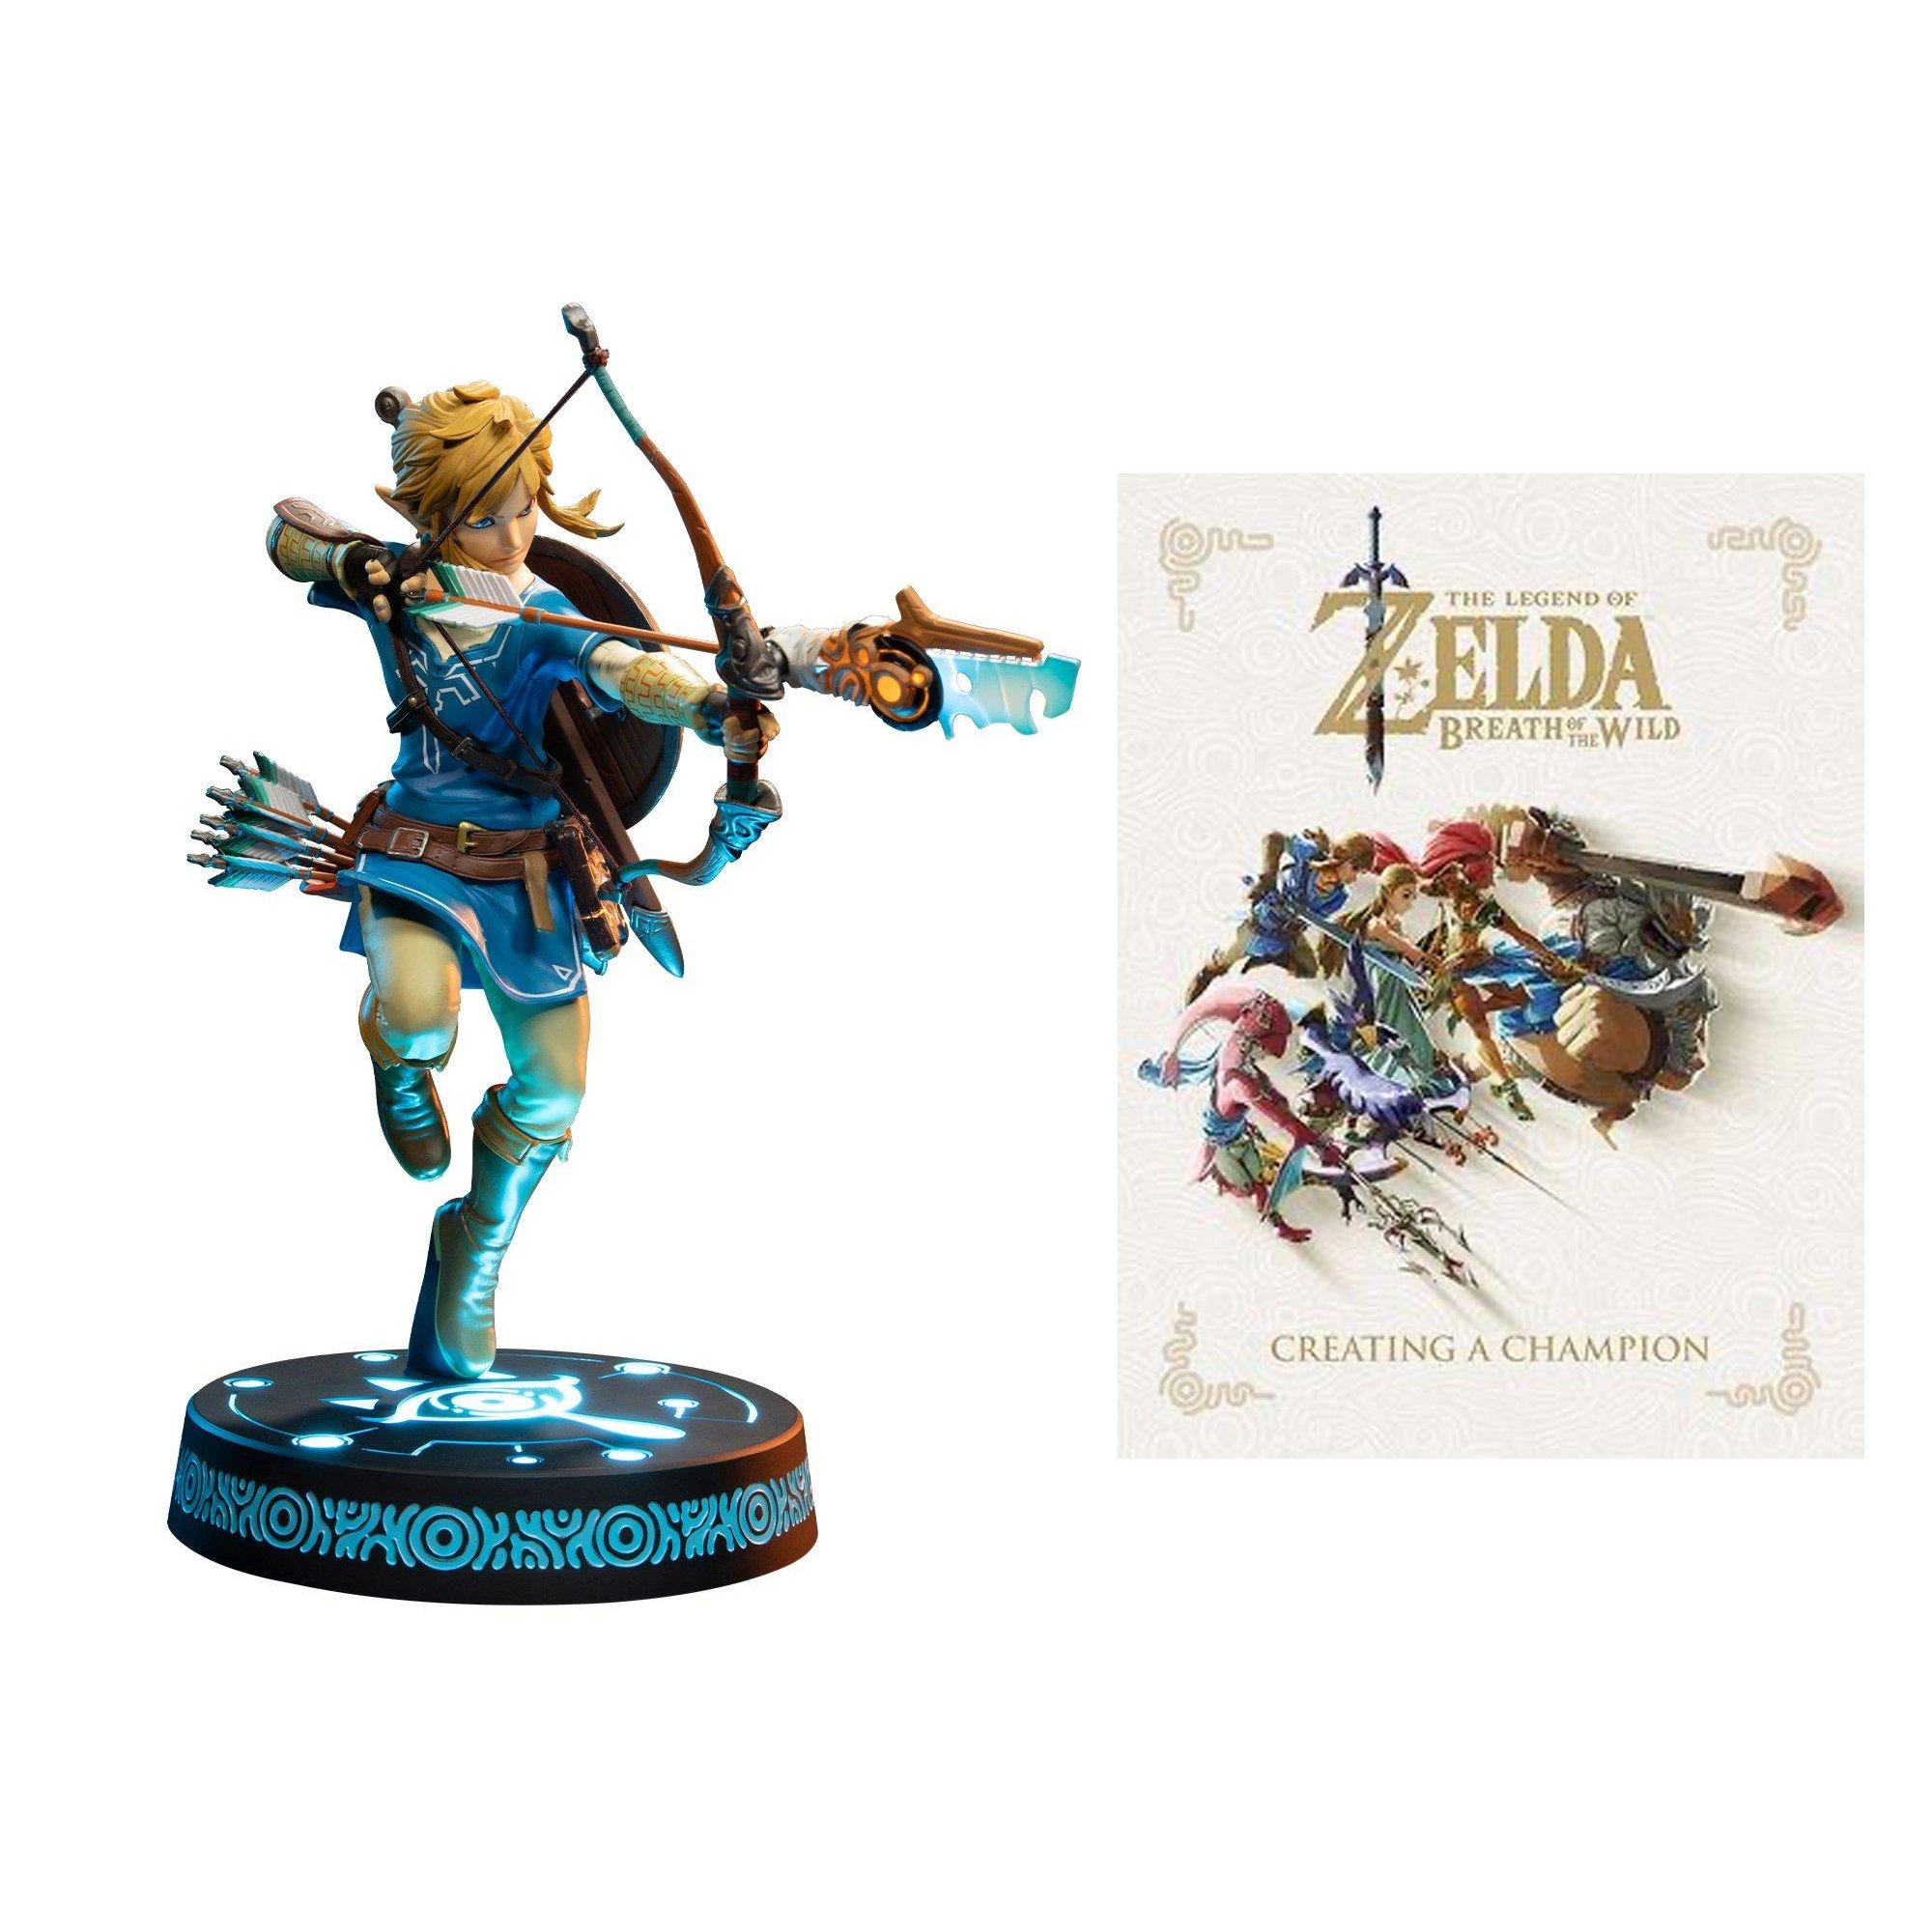 The Legend Zelda: Breath of the Wild Creating a Champion Art book and Link Collector's Edition Statue Bundle | GameStop